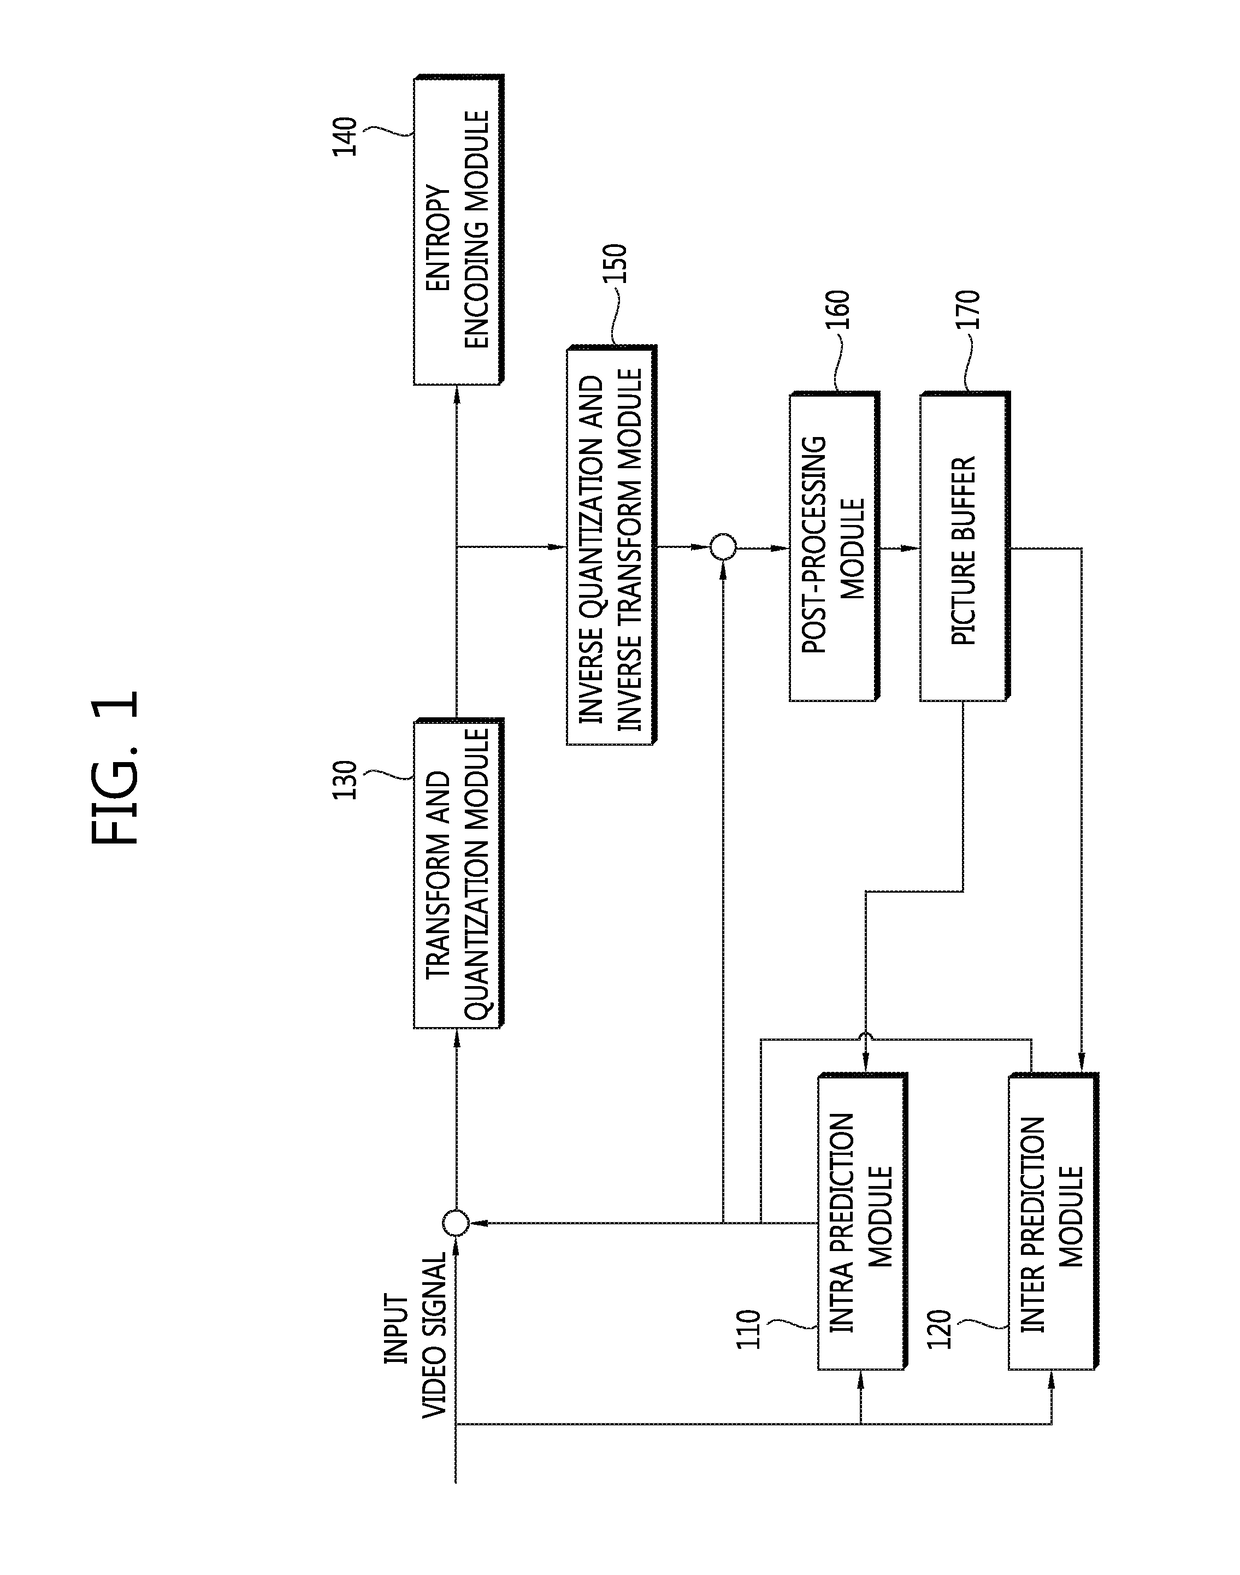 Method and apparatus for generating reconstructed block